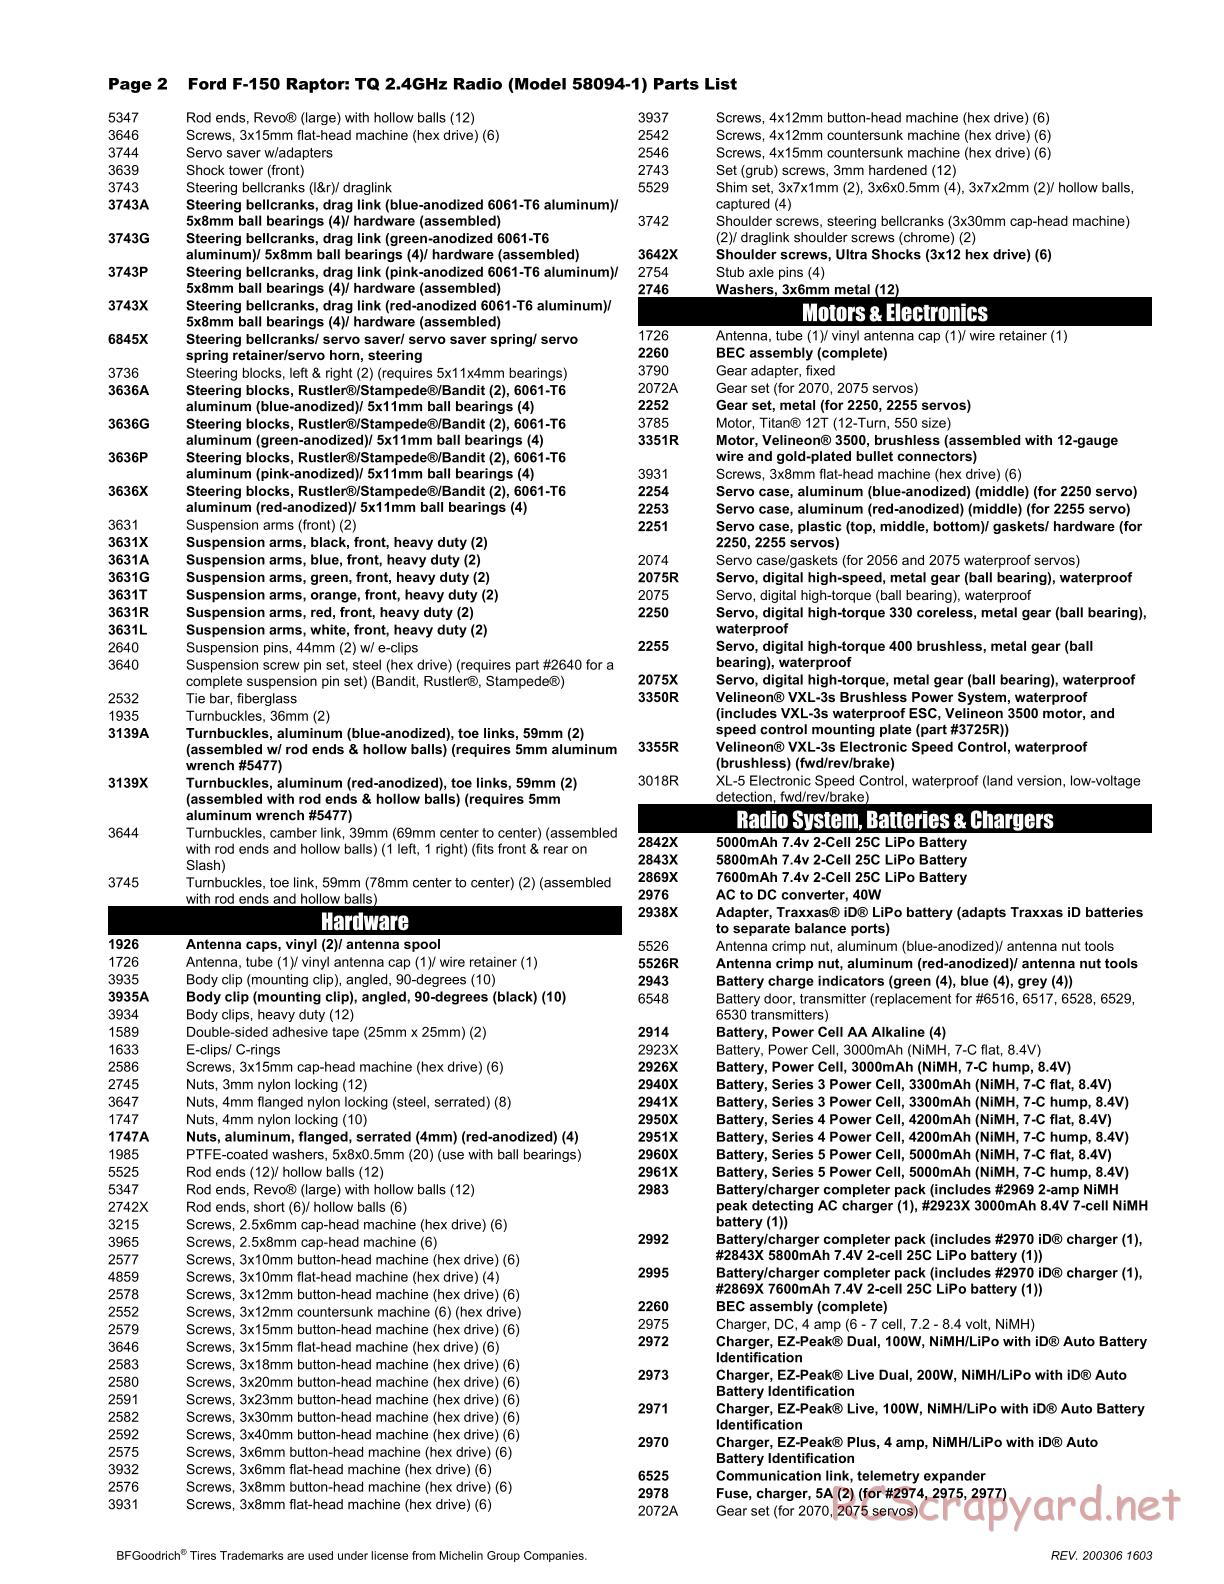 Traxxas - 2017 Ford F-150 Raptor - Parts List - Page 2